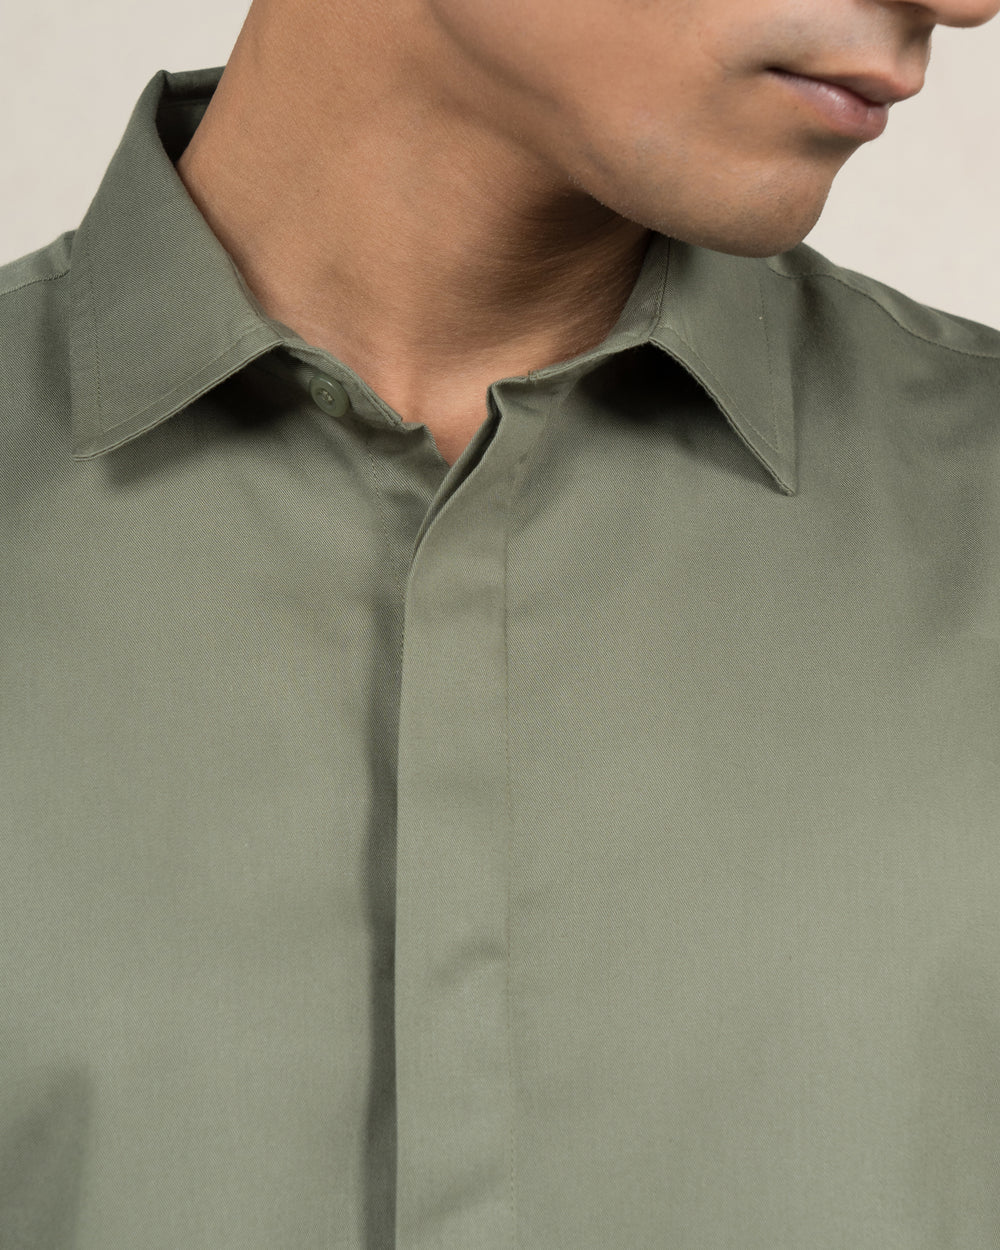 A young person with short dark hair is smiling, wearing a timeless Dark Sage - Classic Shirt made from premium cotton that offers luxury softness. Their sleeves are rolled up, and they pair it with dark jeans. With their right hand in their pocket, they stand against a neutral background with a small green plant to the left.